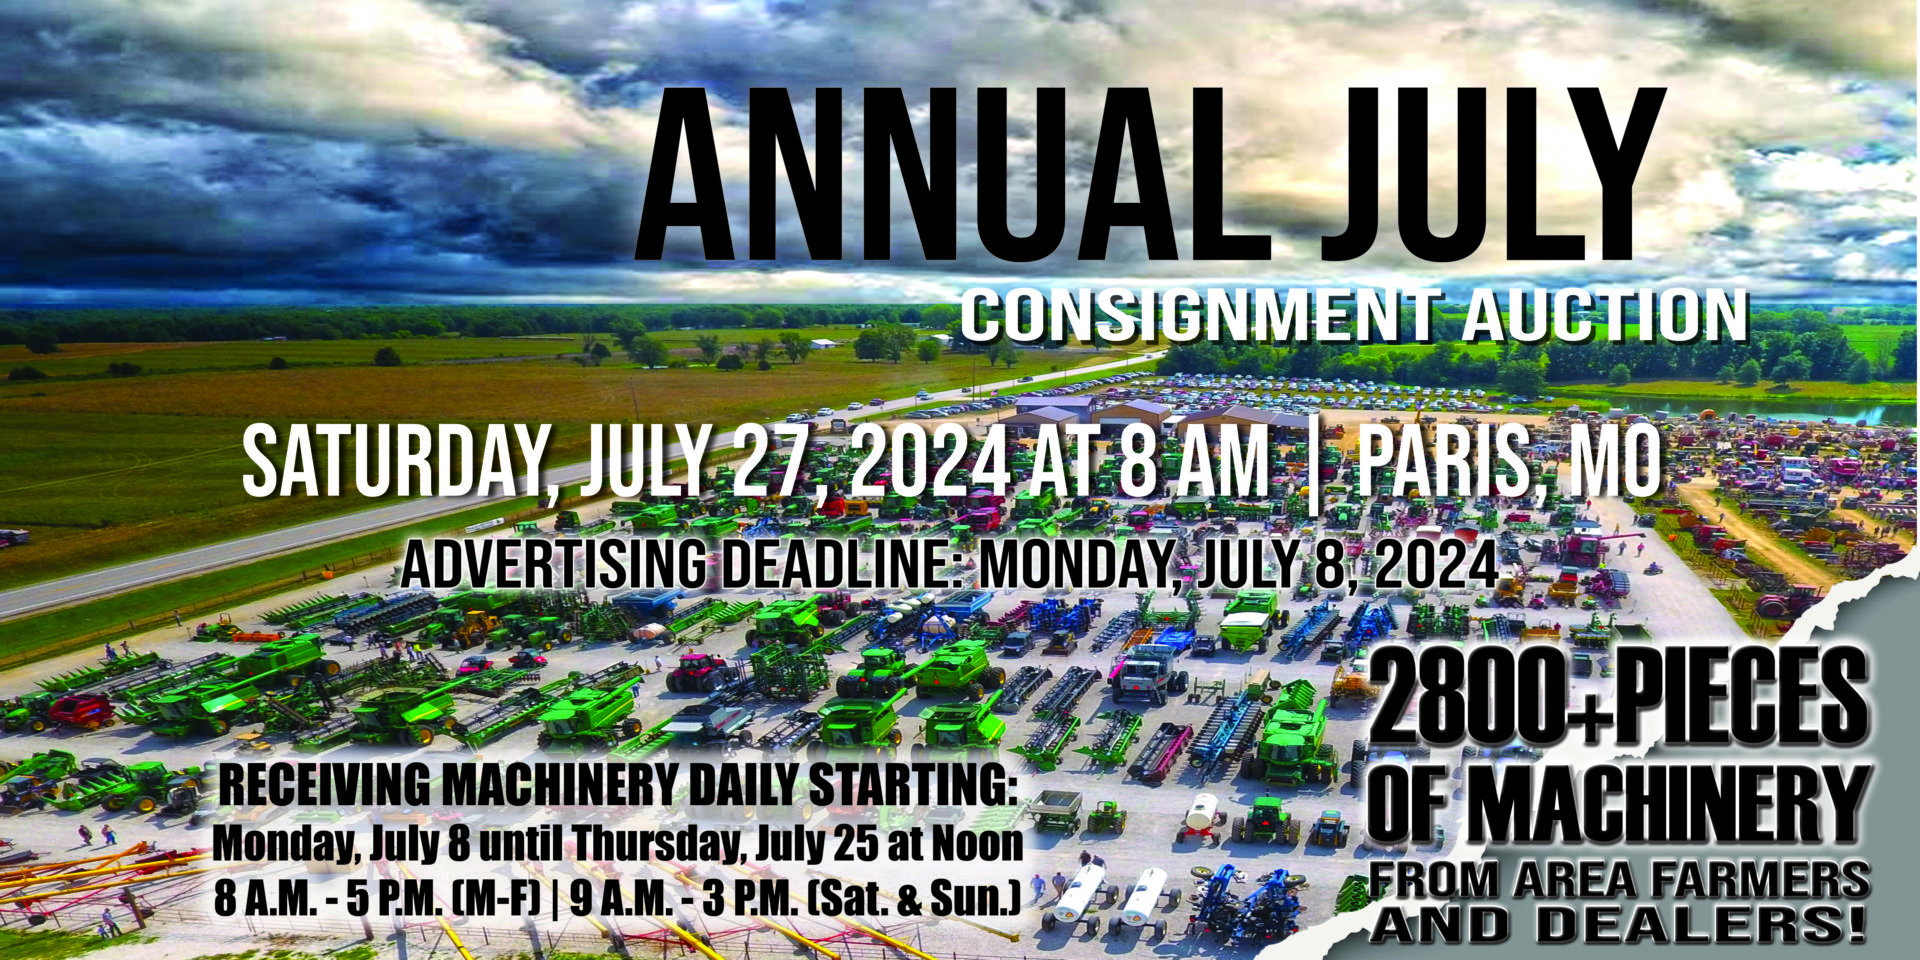 Annual July Consignment Auction